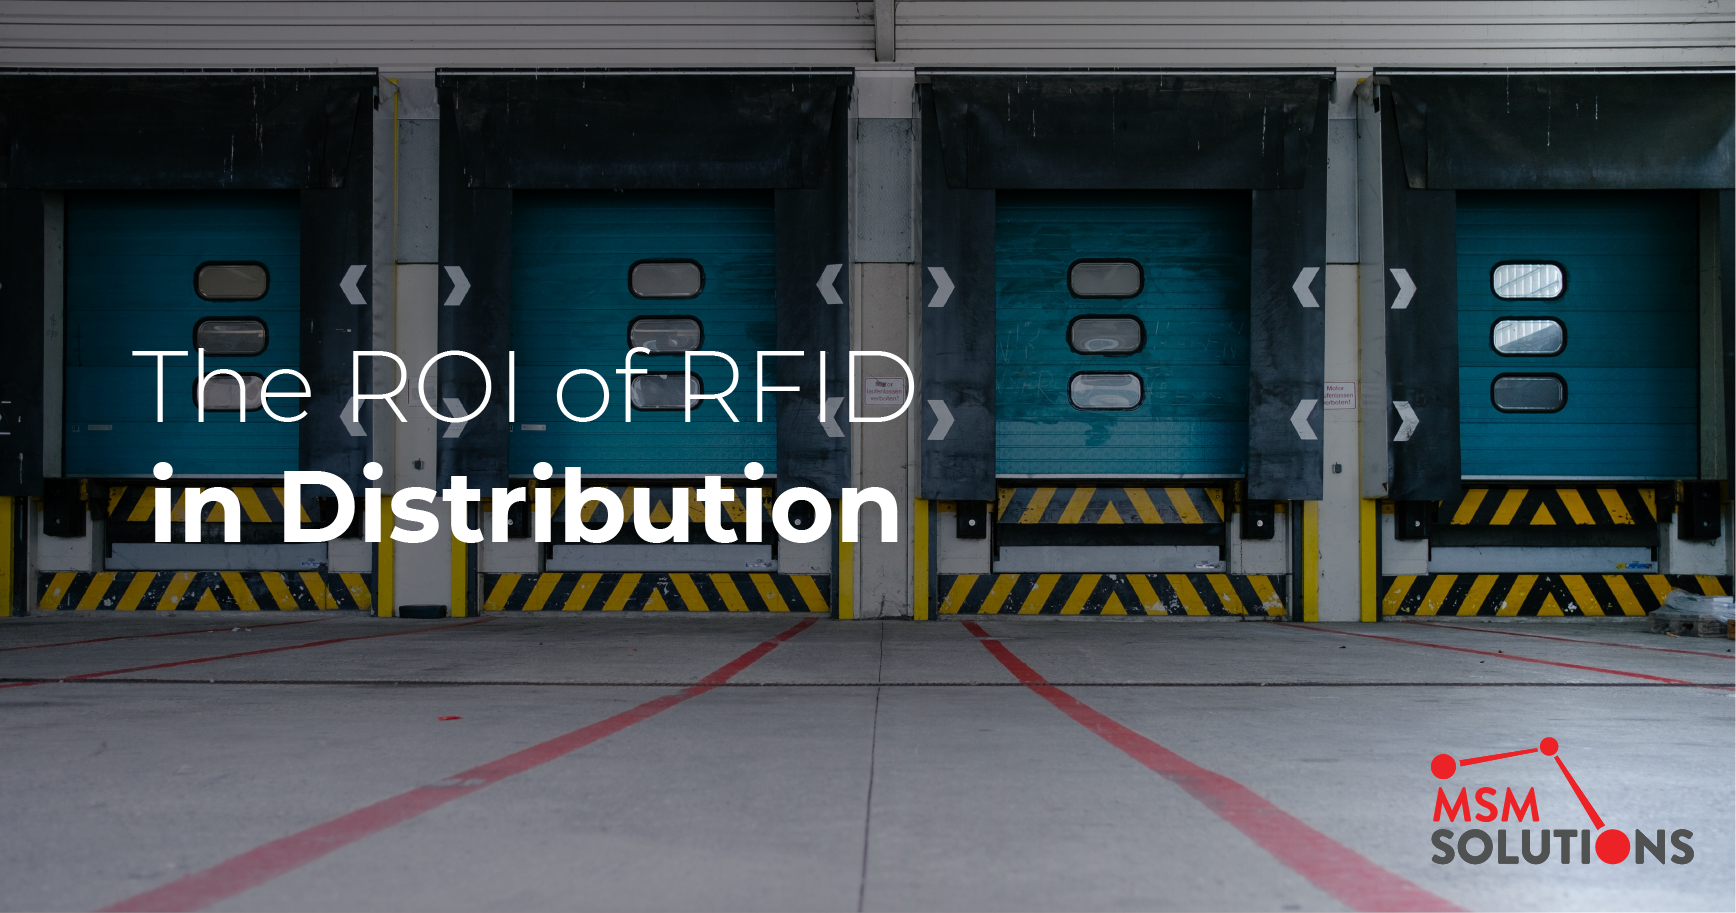 The ROI of RFID in Distribution